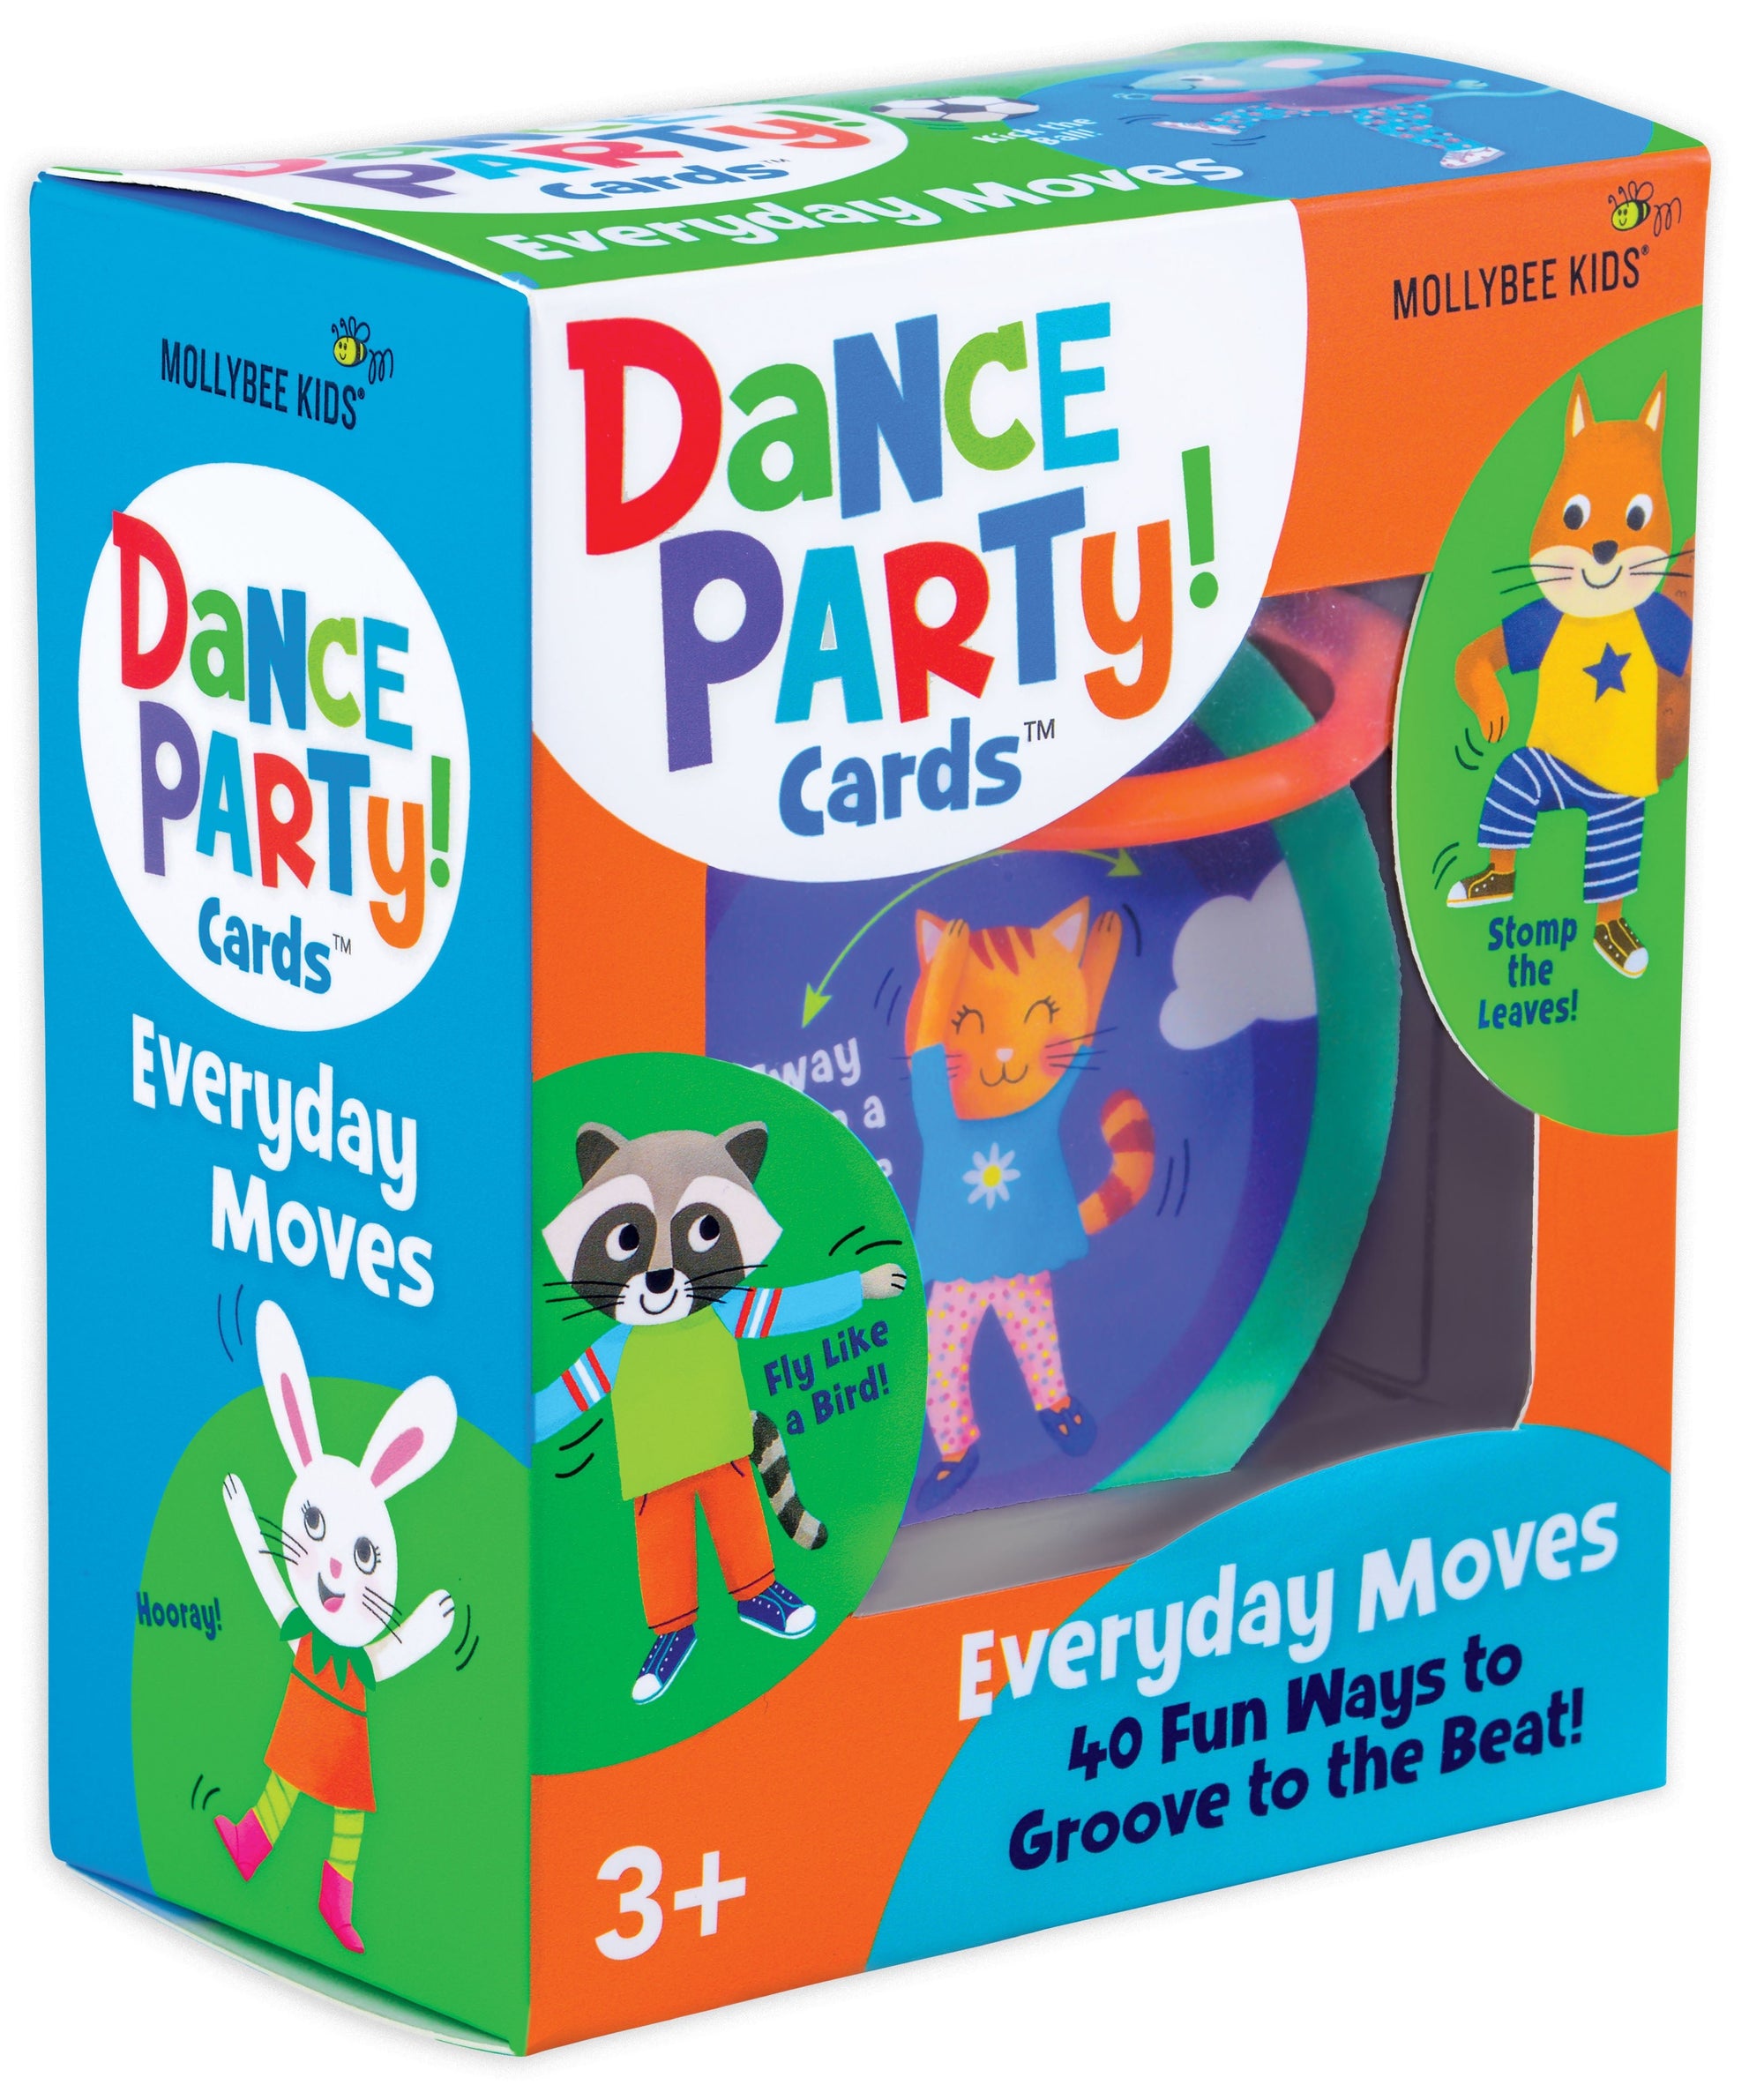 Dance Party Cards Everyday Moves - Mollybee Kids